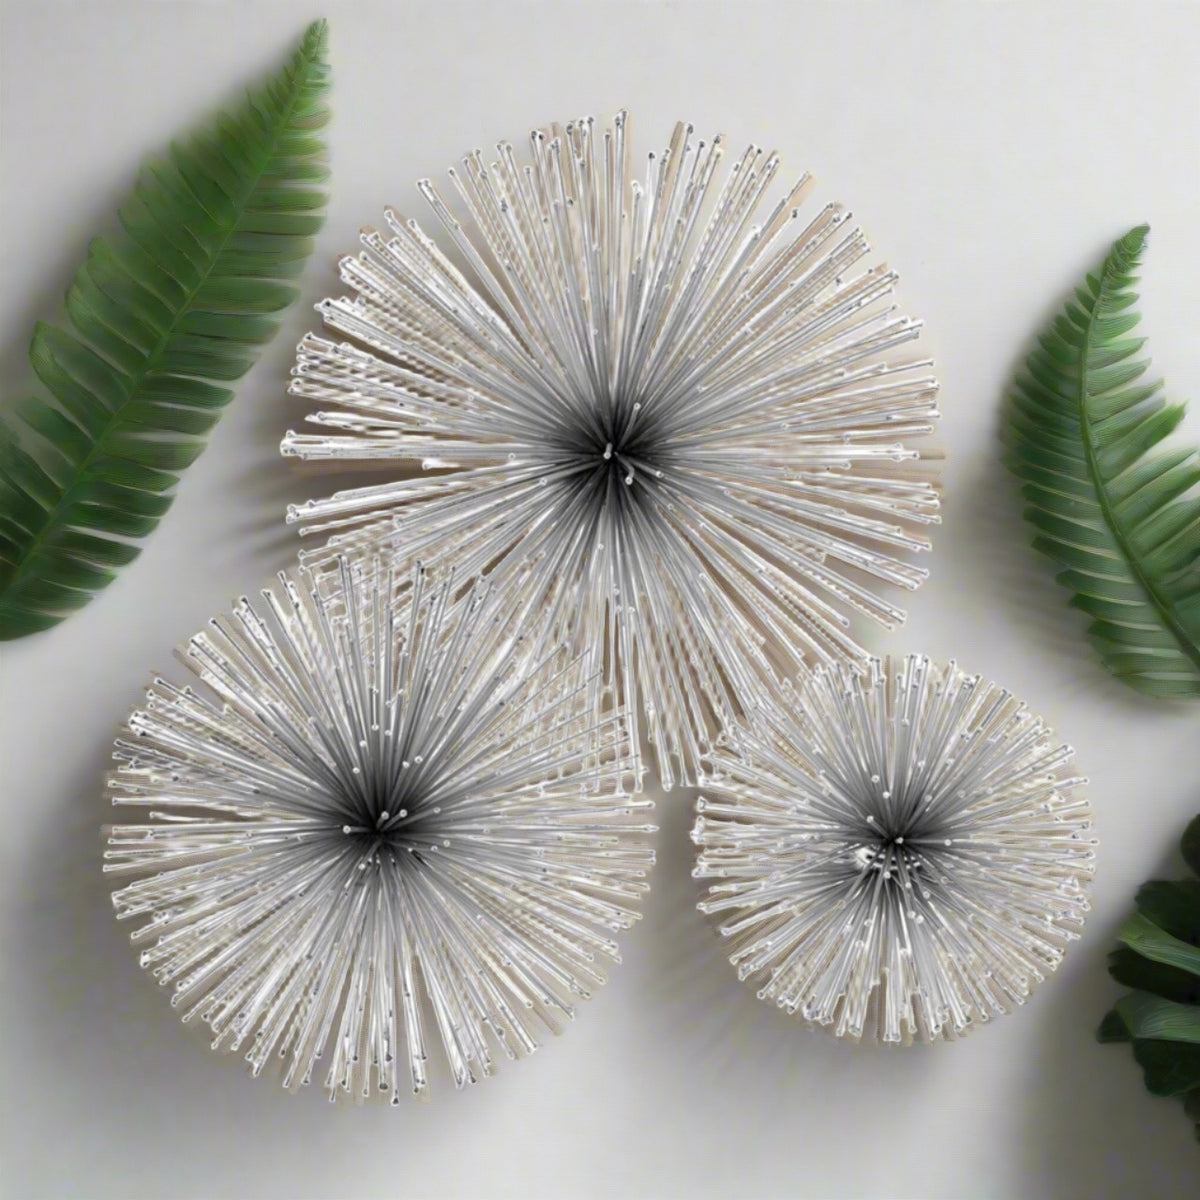 Spiked Silver Urchin Spheres